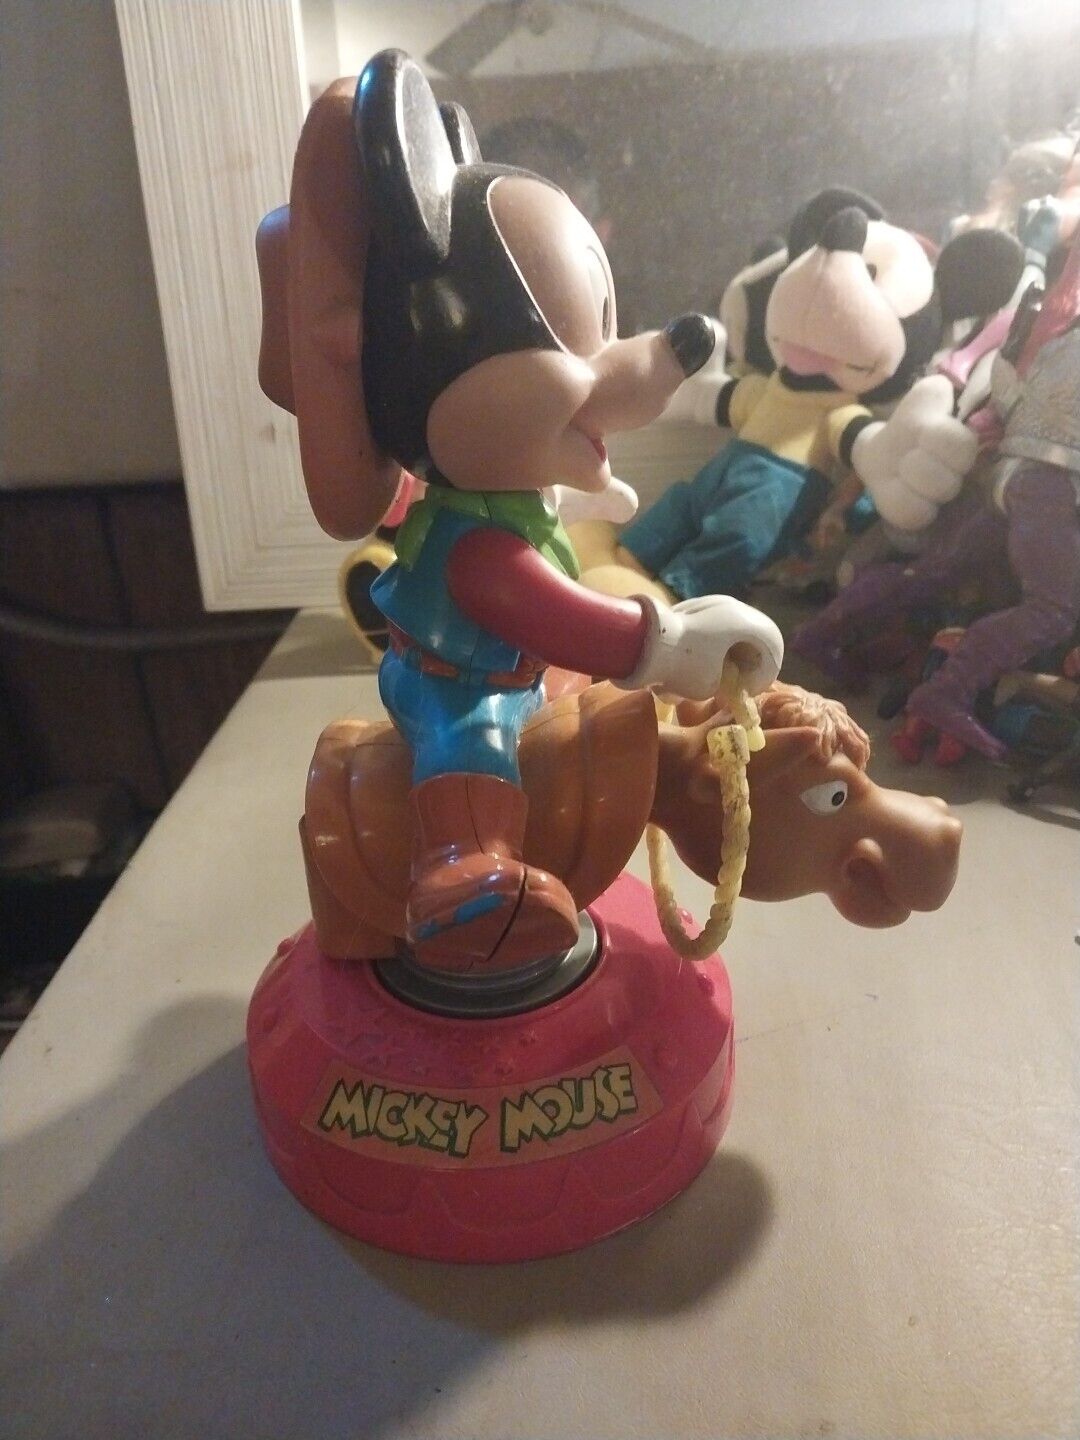 Vintage Disney Arco Toys Wind Up Rodeo Cowboy Mickey Mouse Riding a Bull1980's